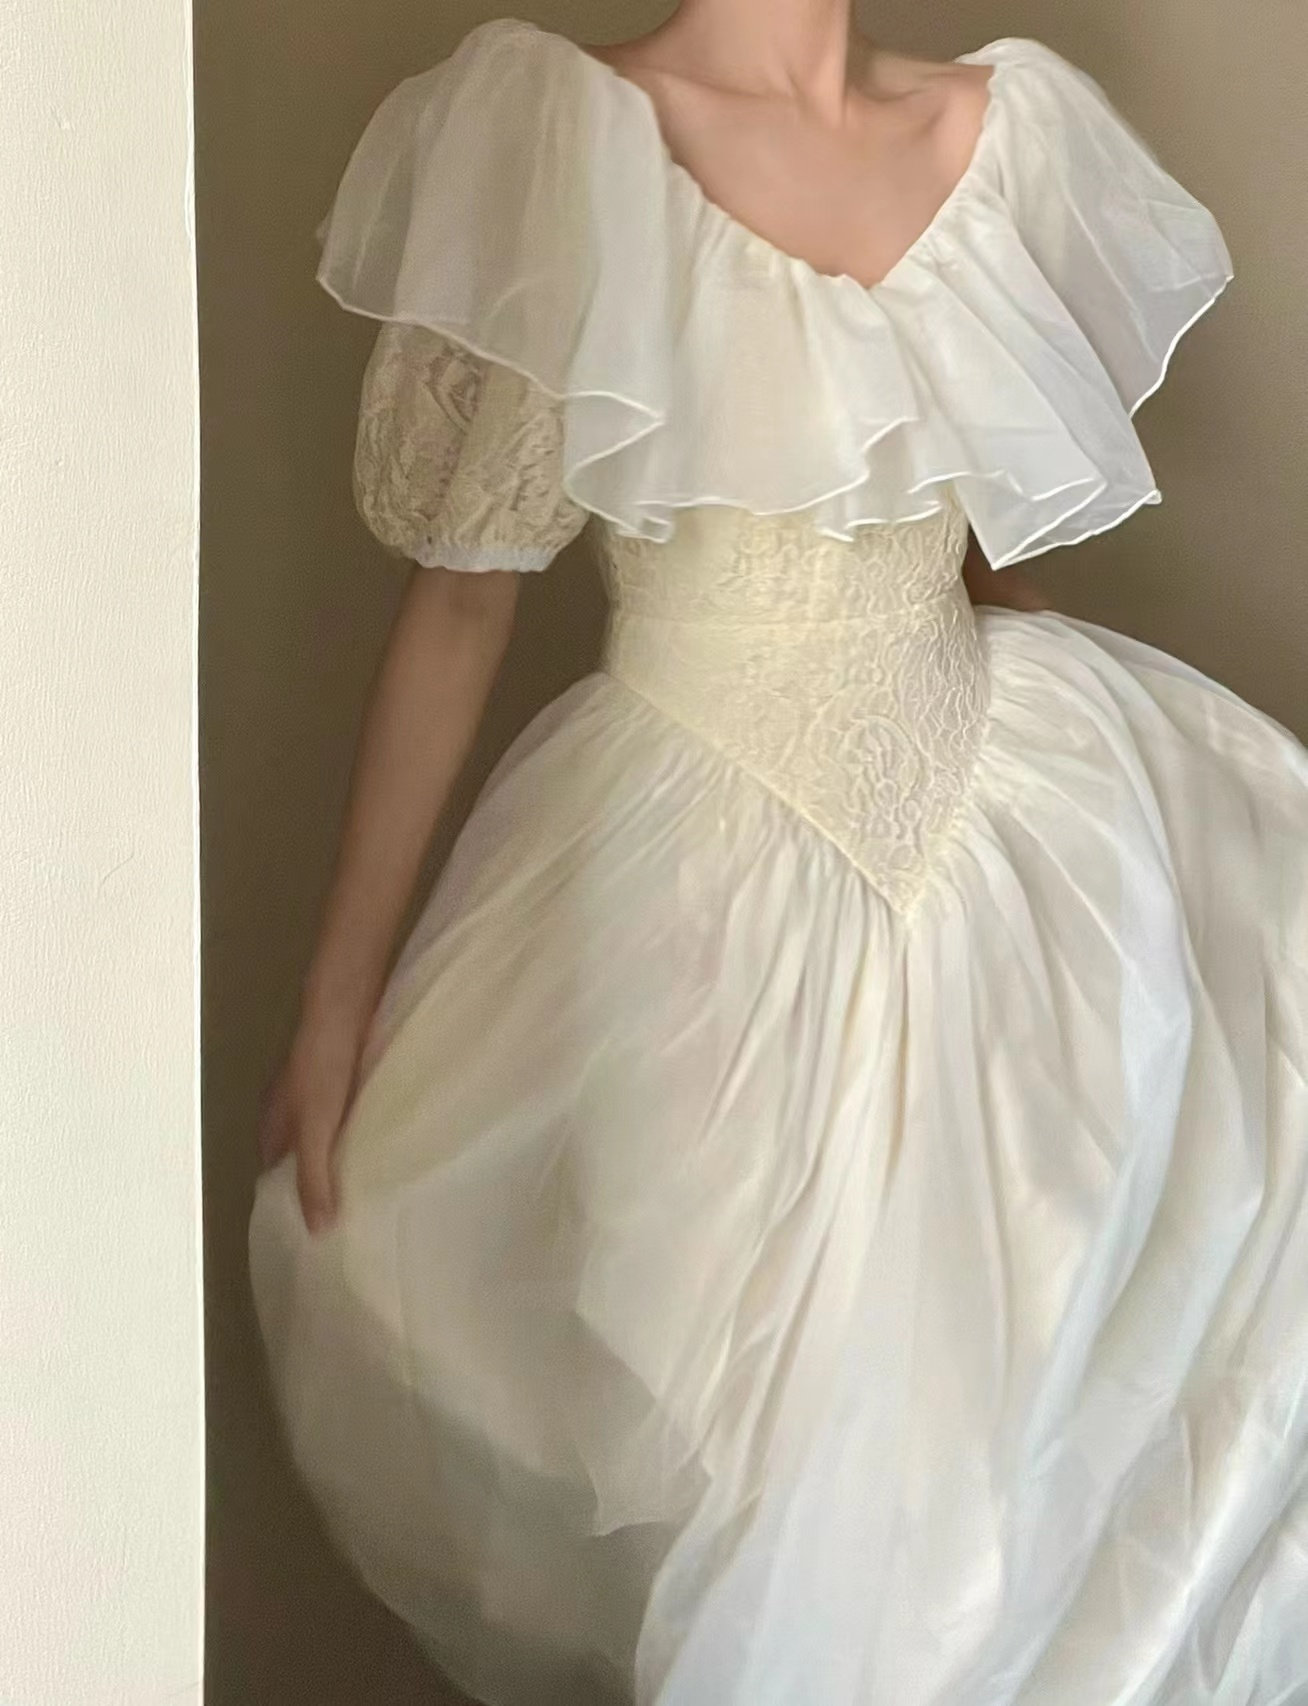 Vintage Lotty Dress - French Victorian Wedding Style